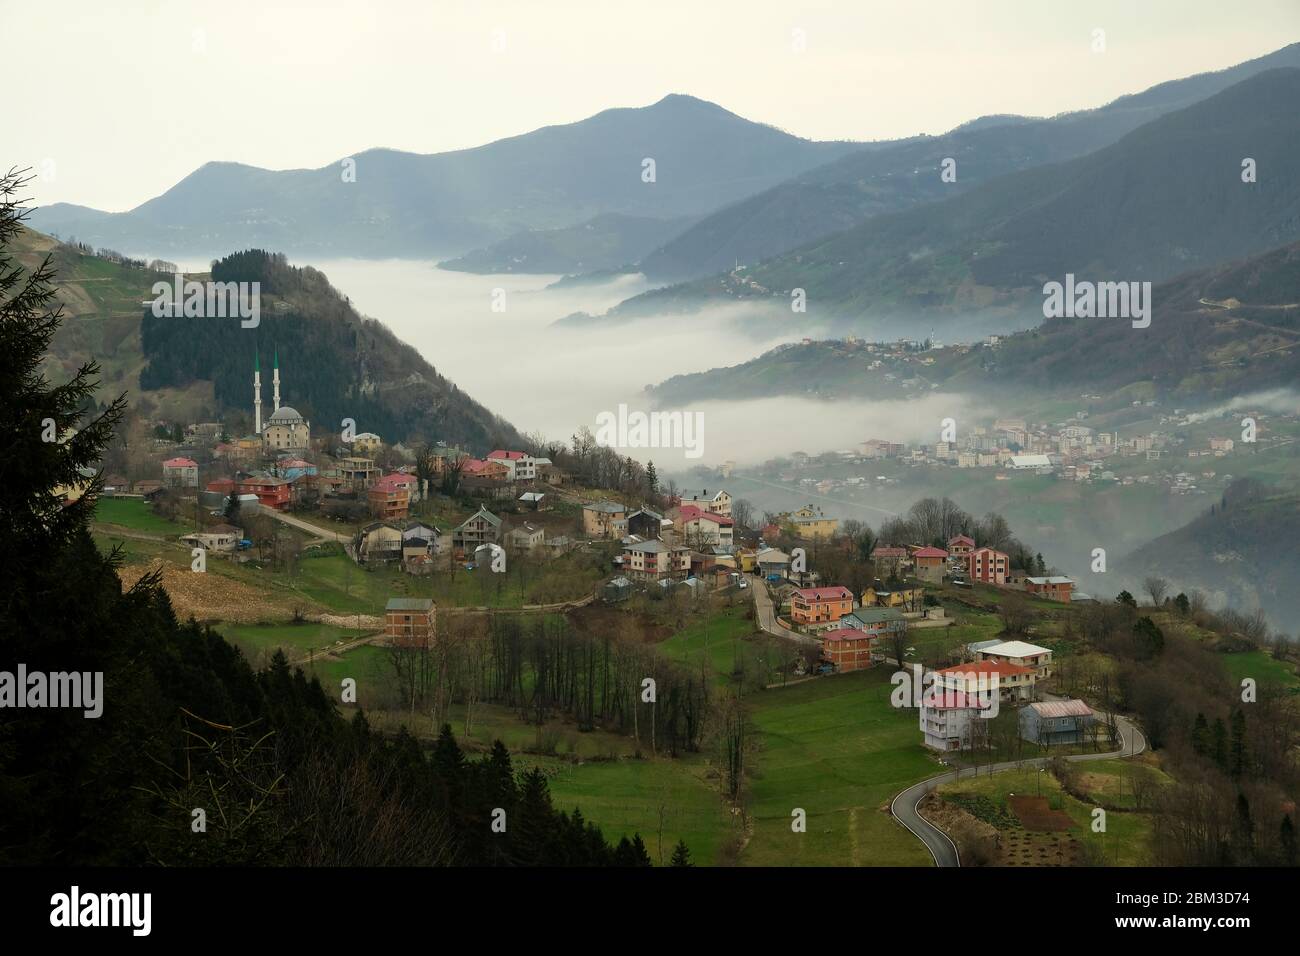 A typical village settlement in the forests of Trabzon province Stock Photo